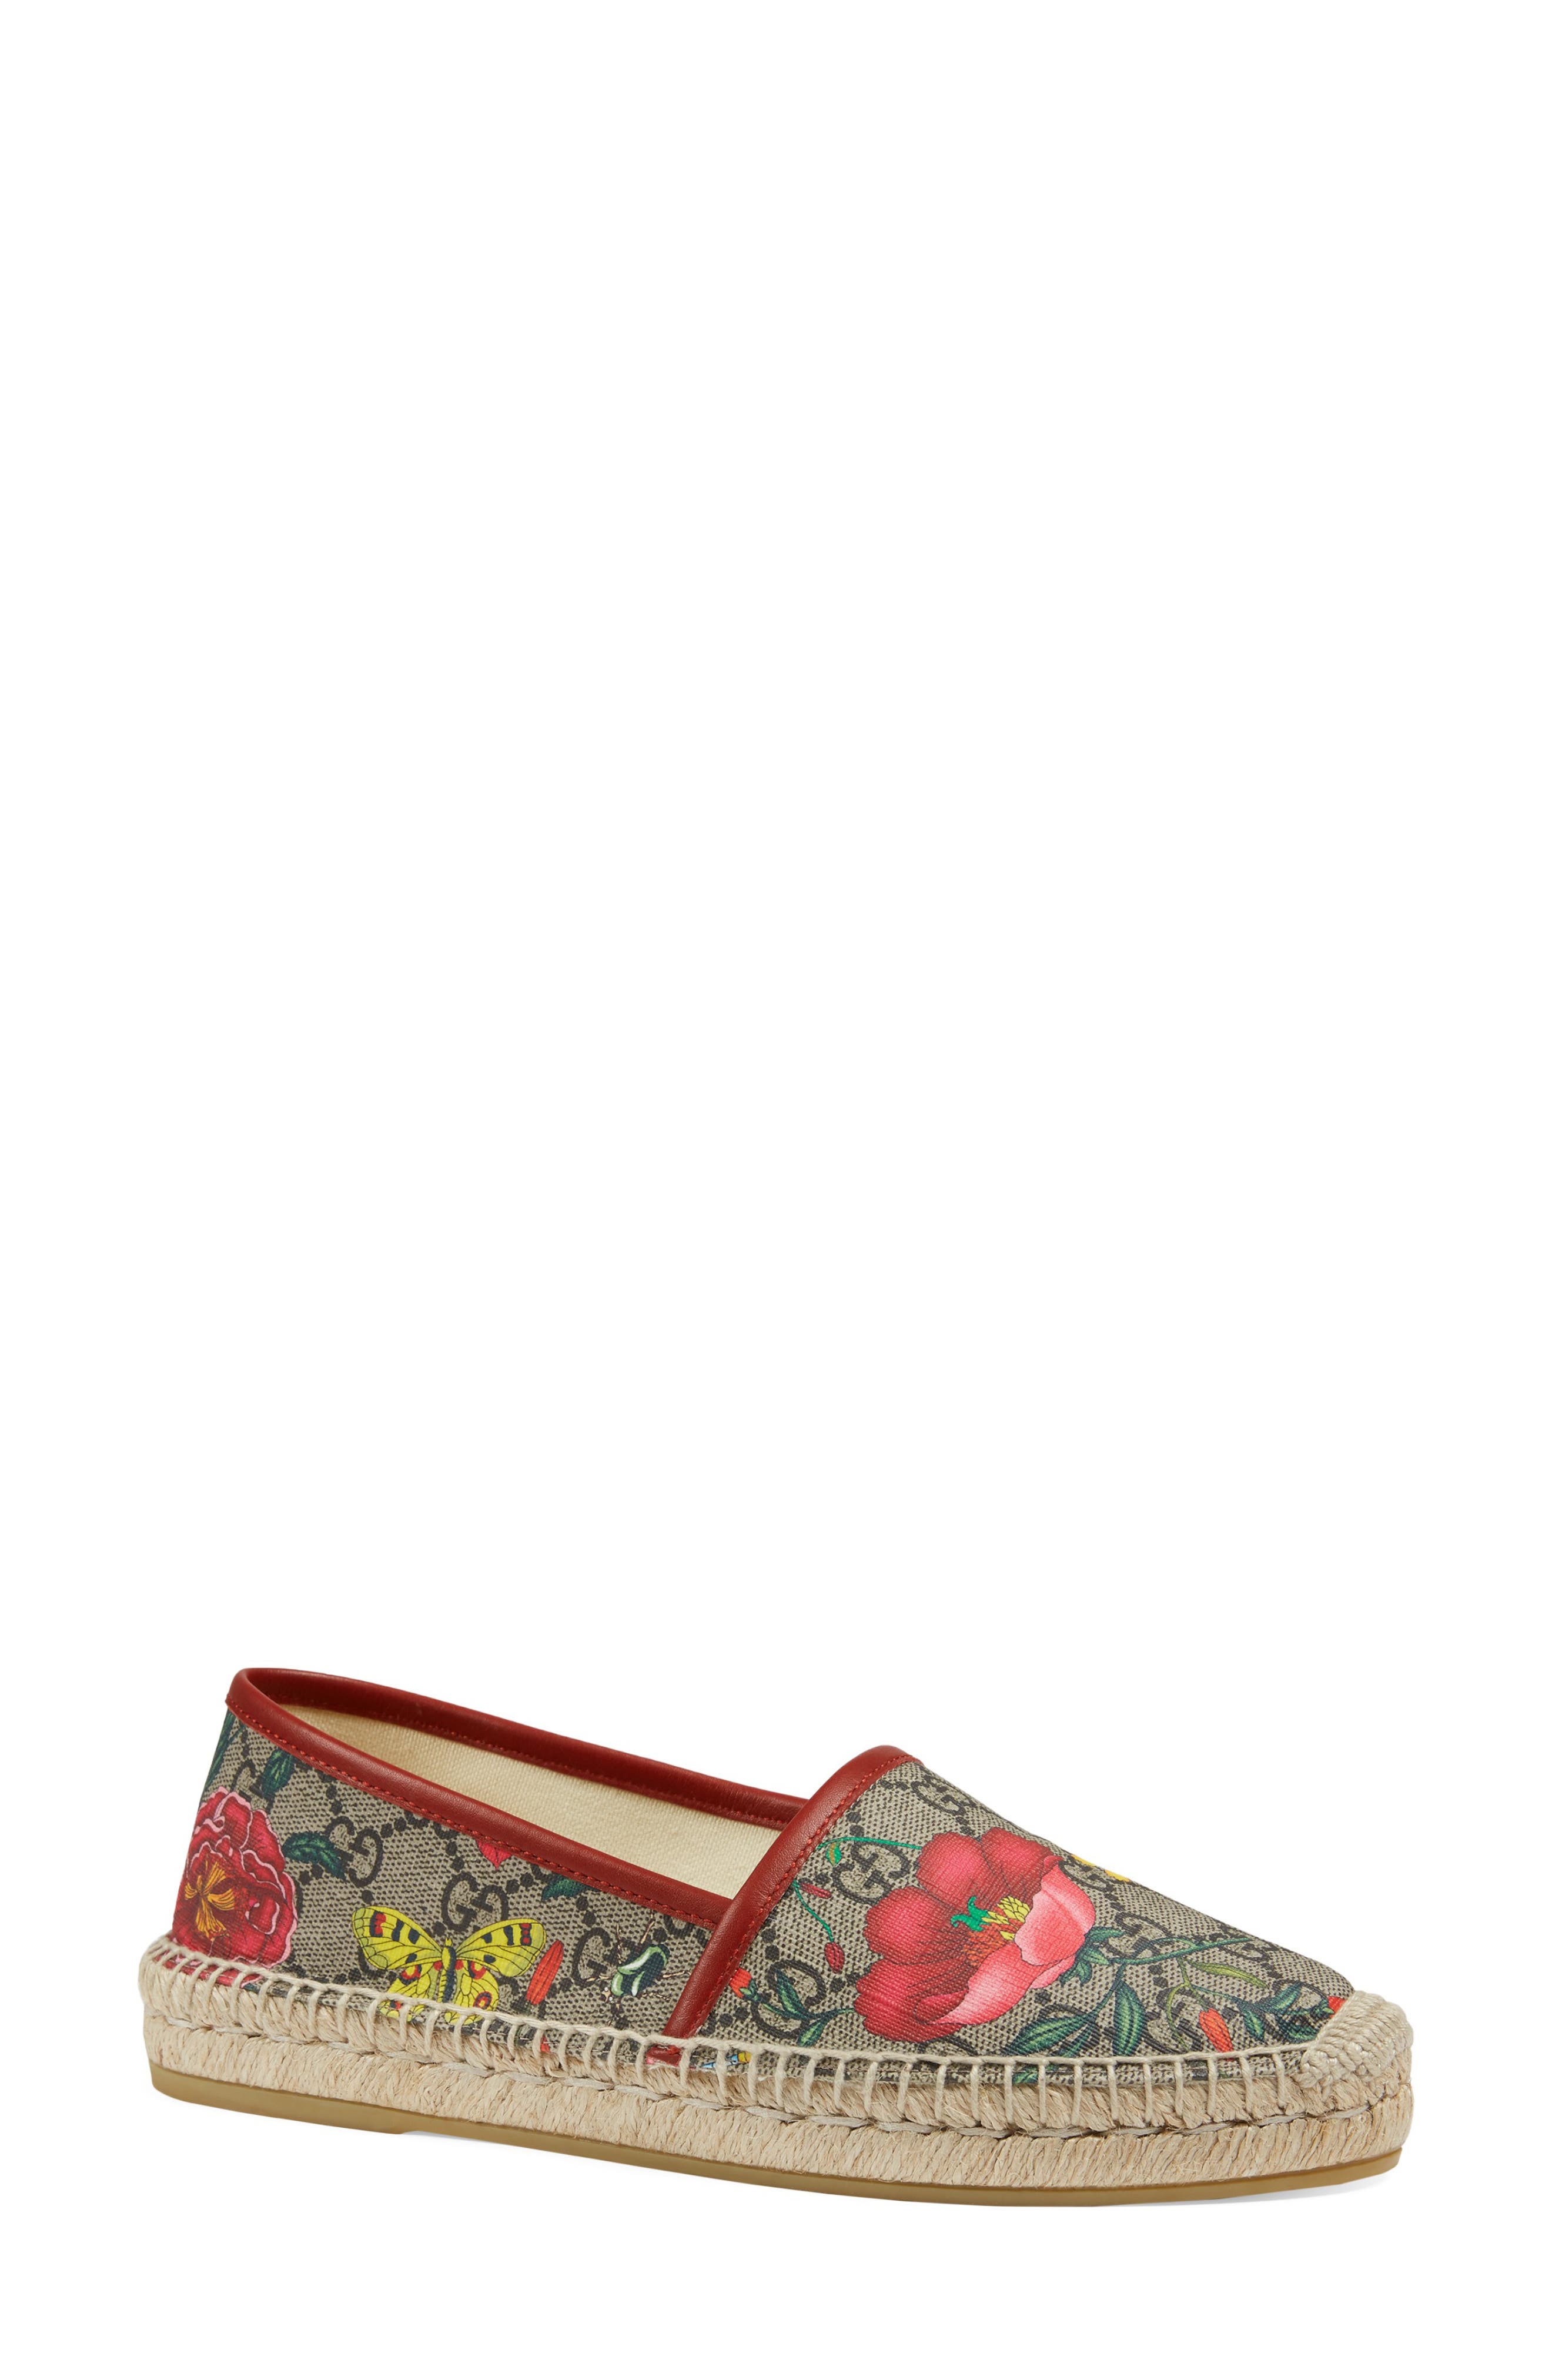 gucci floral slip on